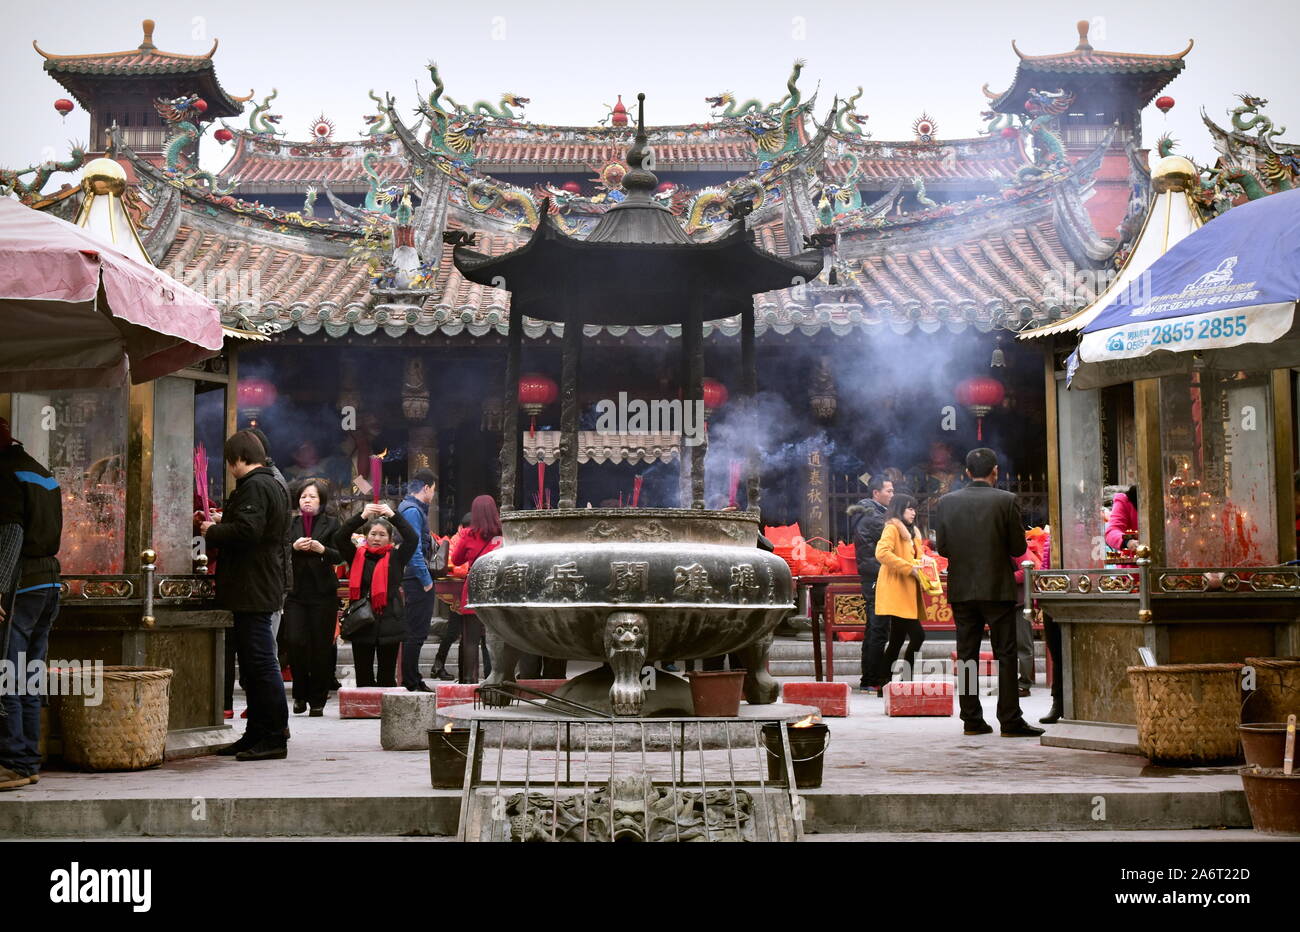 Old traditions at Tonghuai Guanyue temple of Chinese native religion in Quanzhou, China Stock Photo